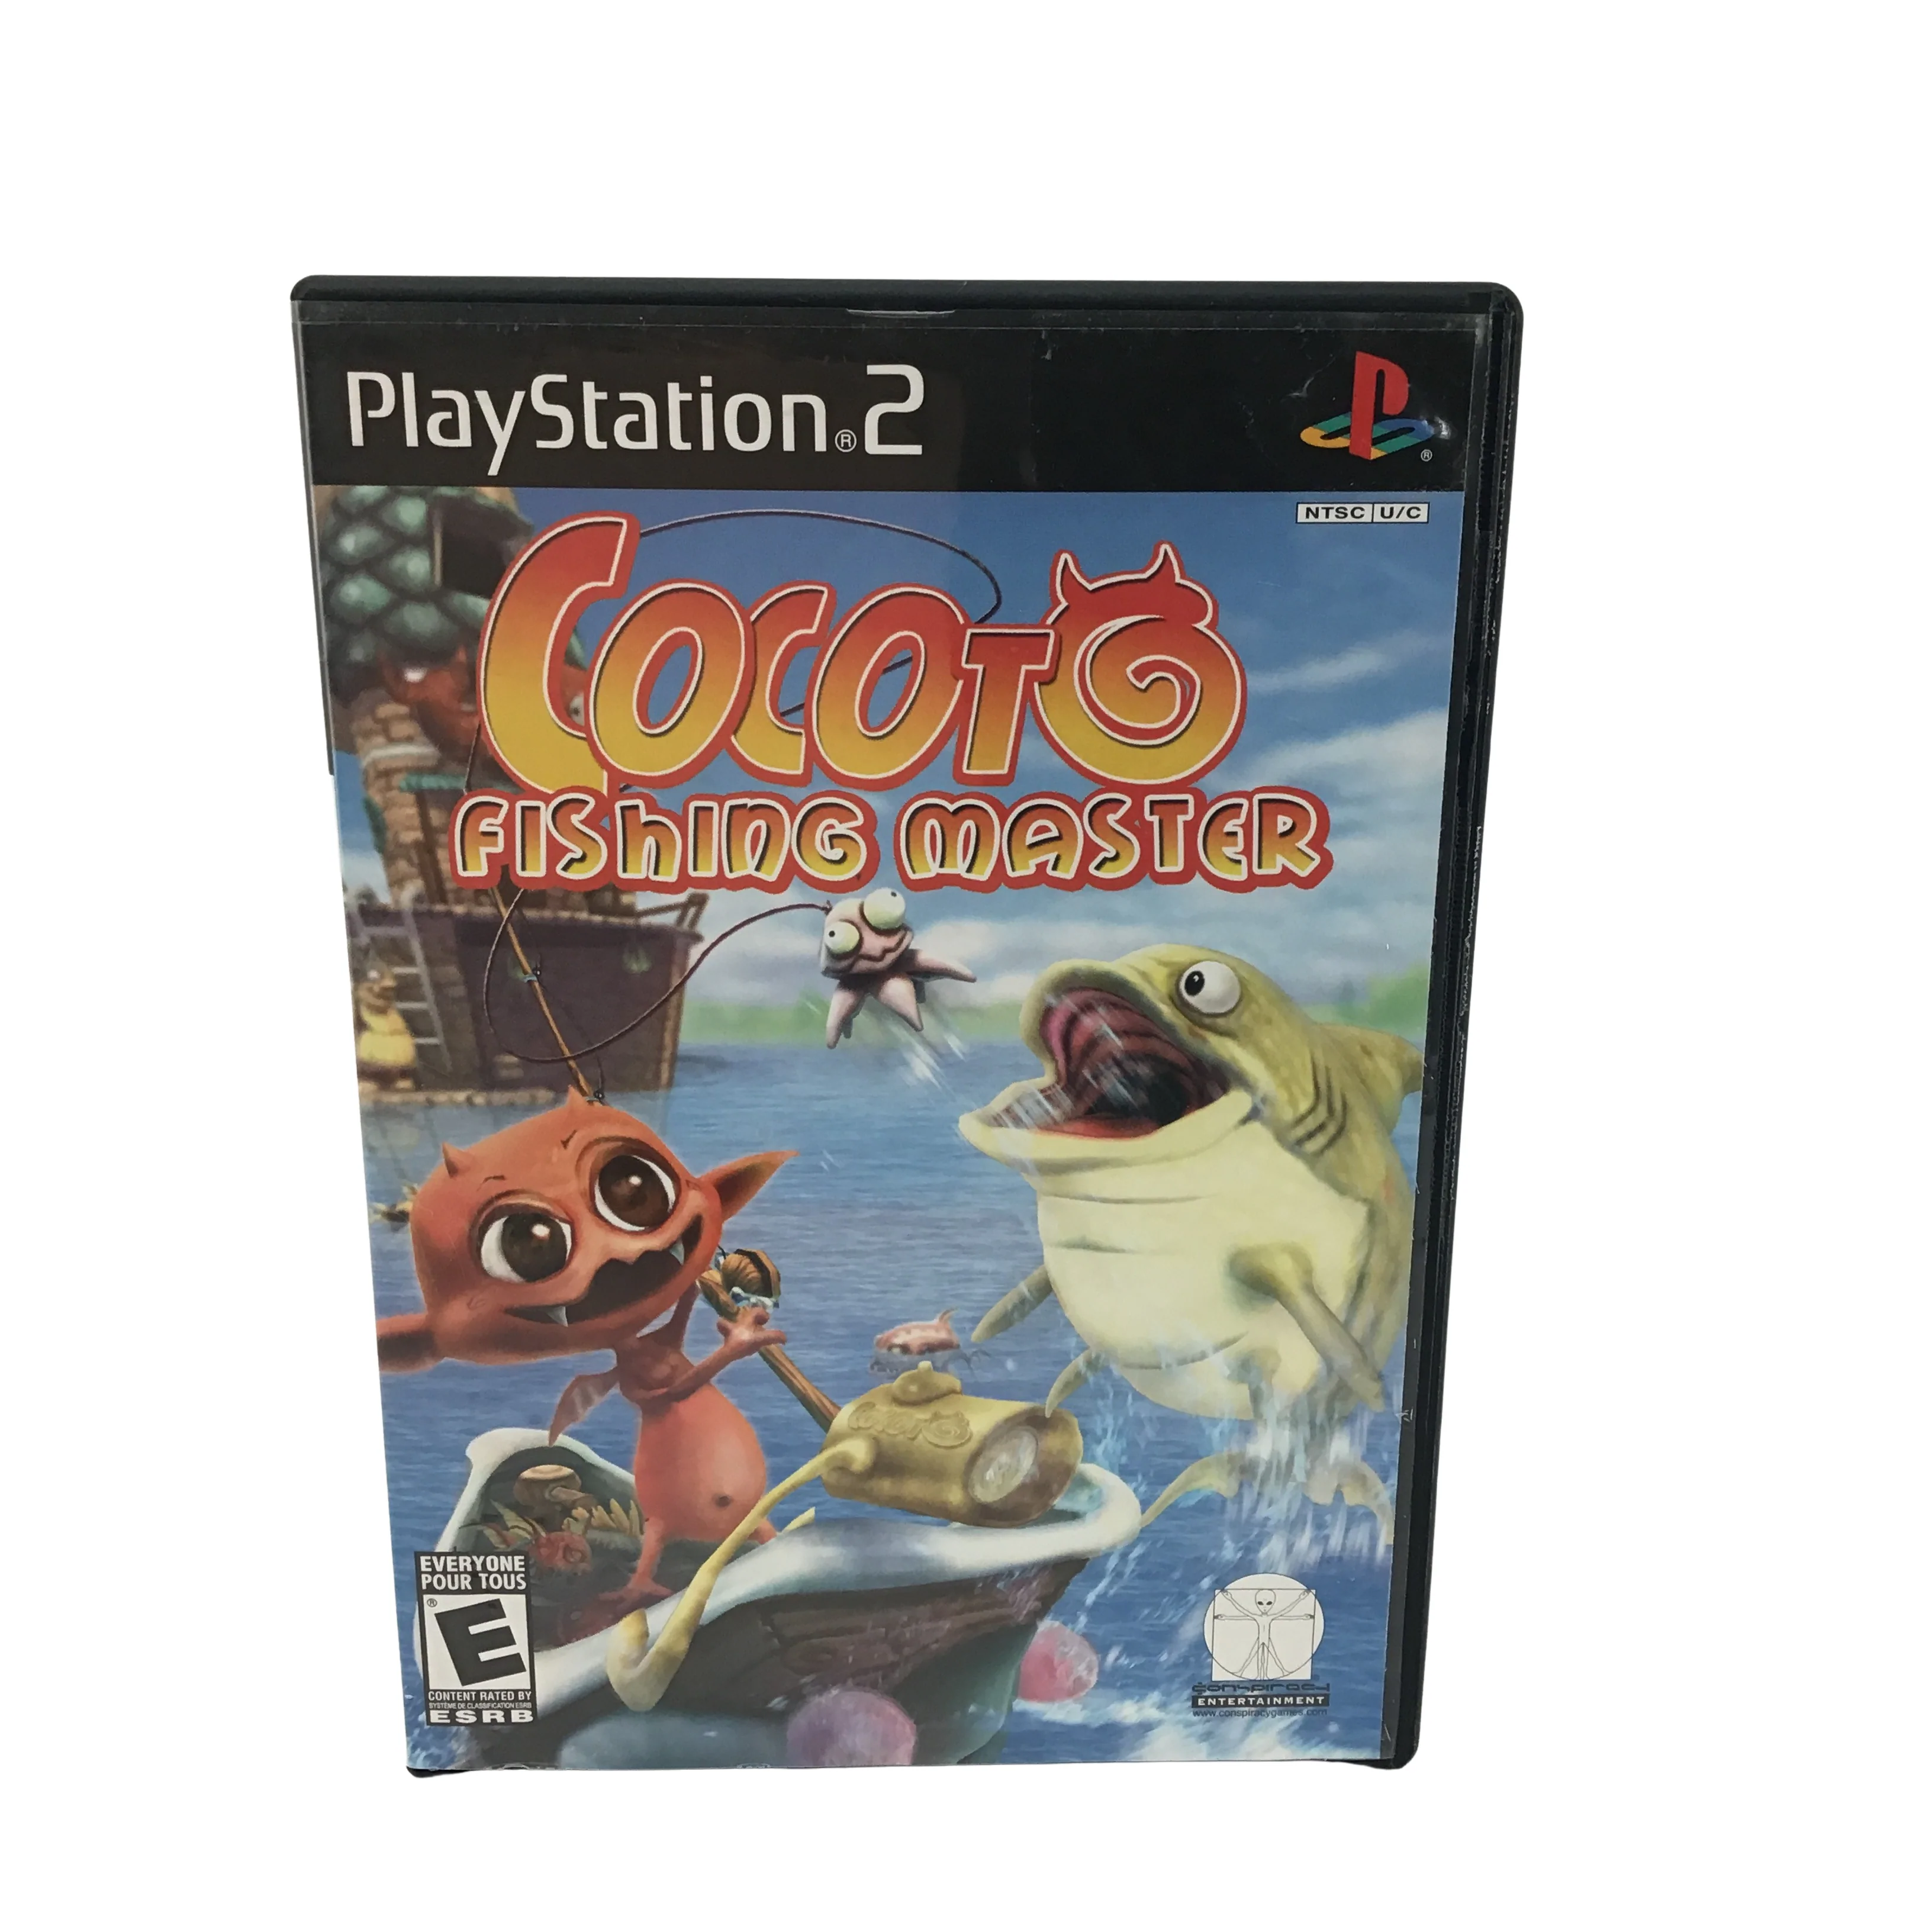 PlayStation 2 : Cocoto Fishing Master Game / Video Game **USED